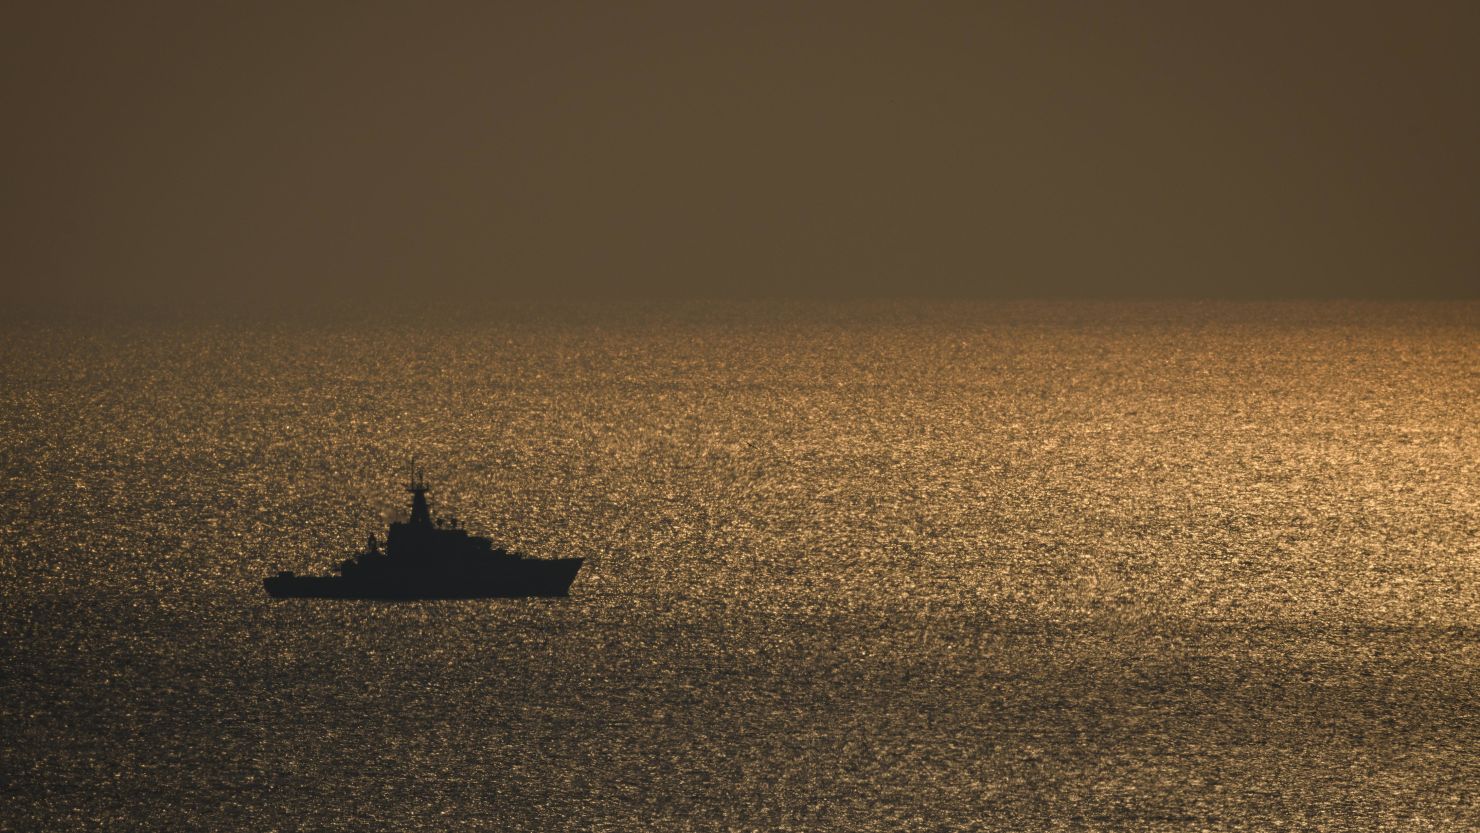 A ship in the English Channel (file picture).